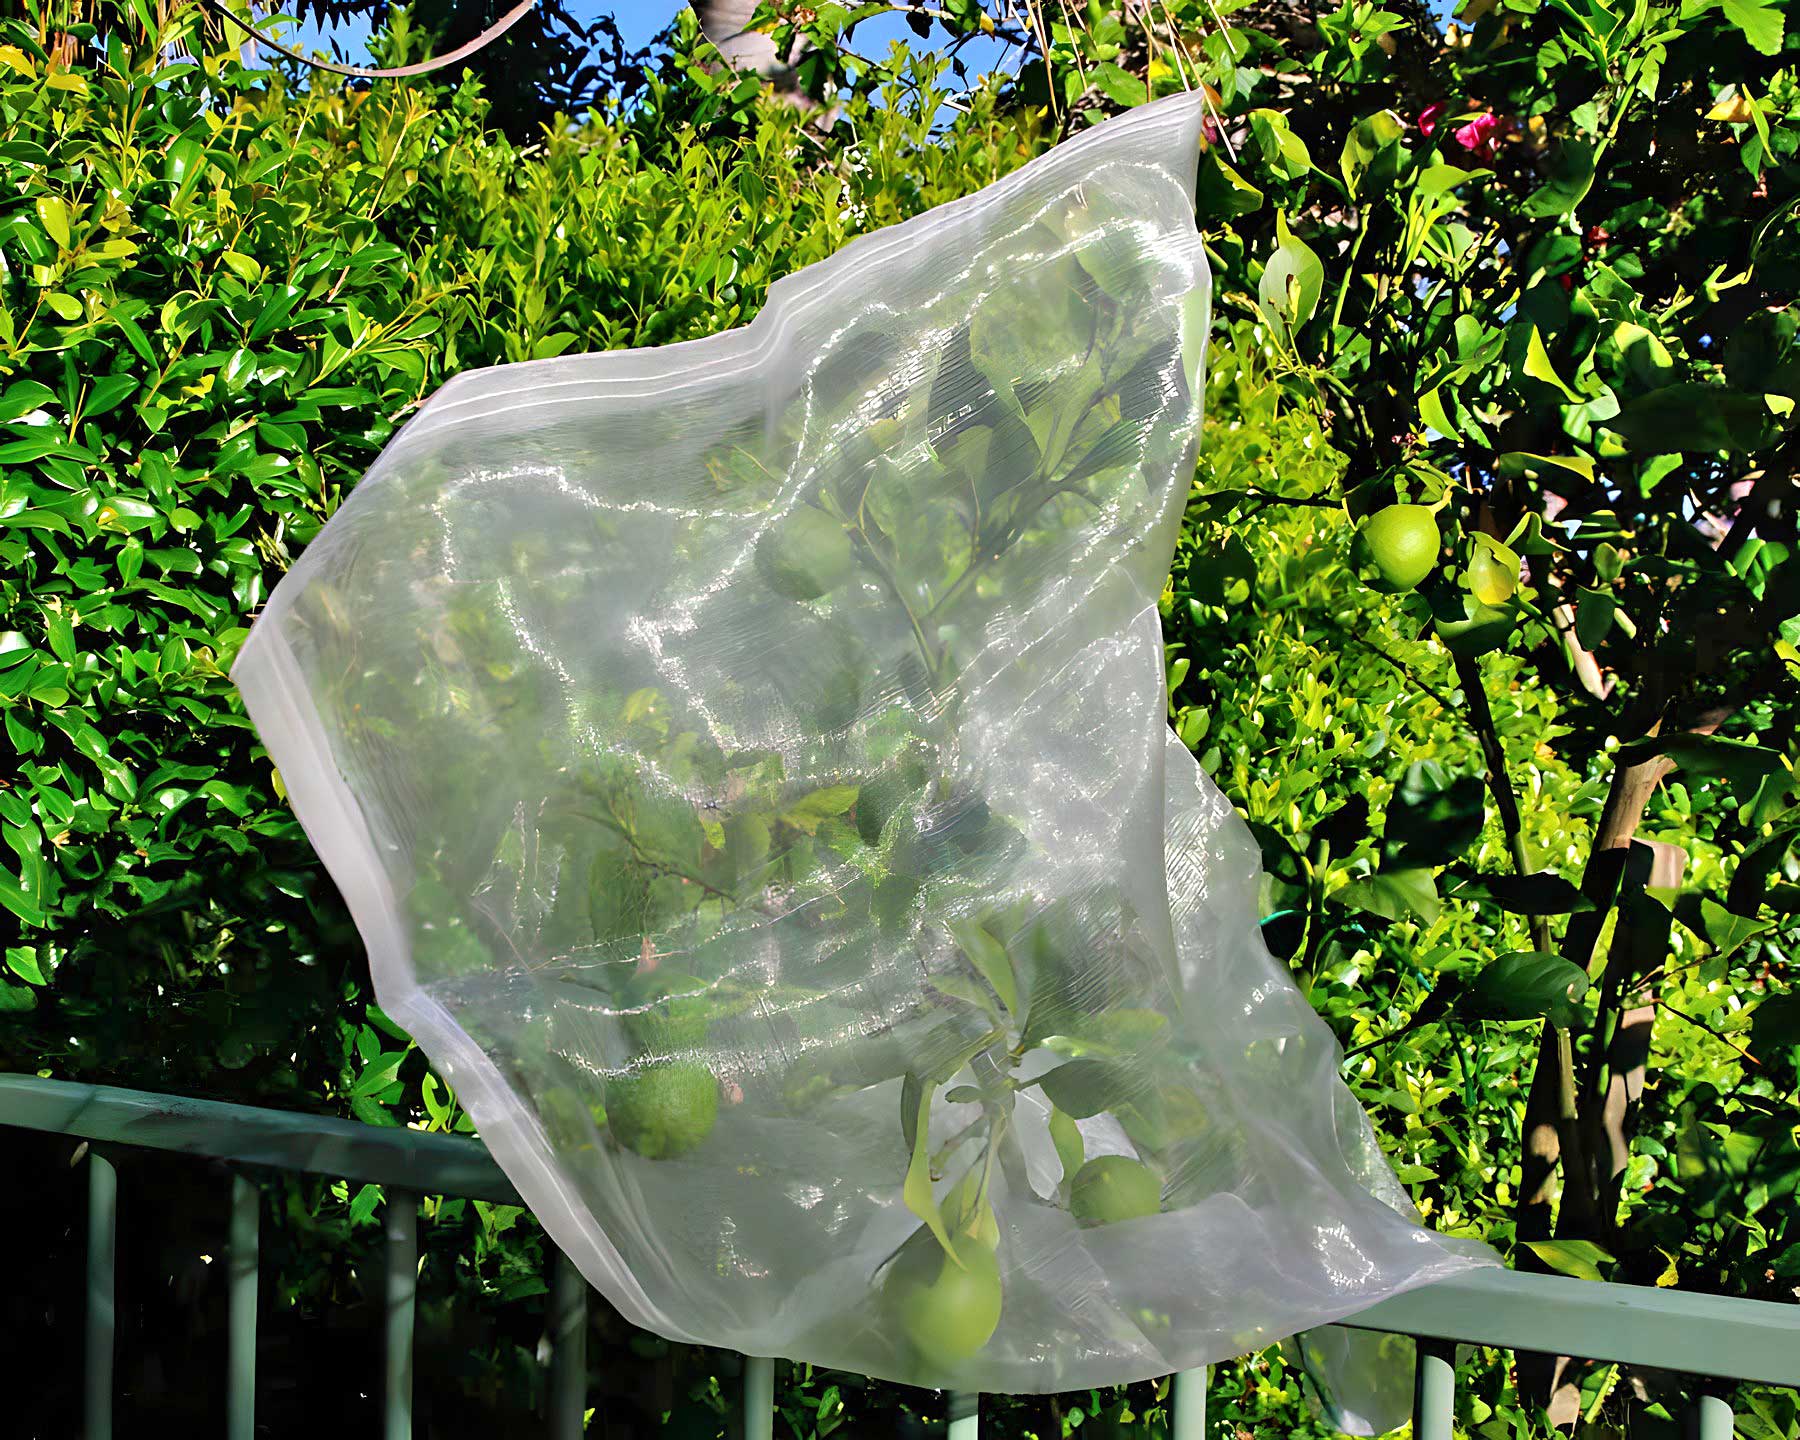 Fruit Saver Drawstring Mesh Bags are perfect for protecting single branches of fruit